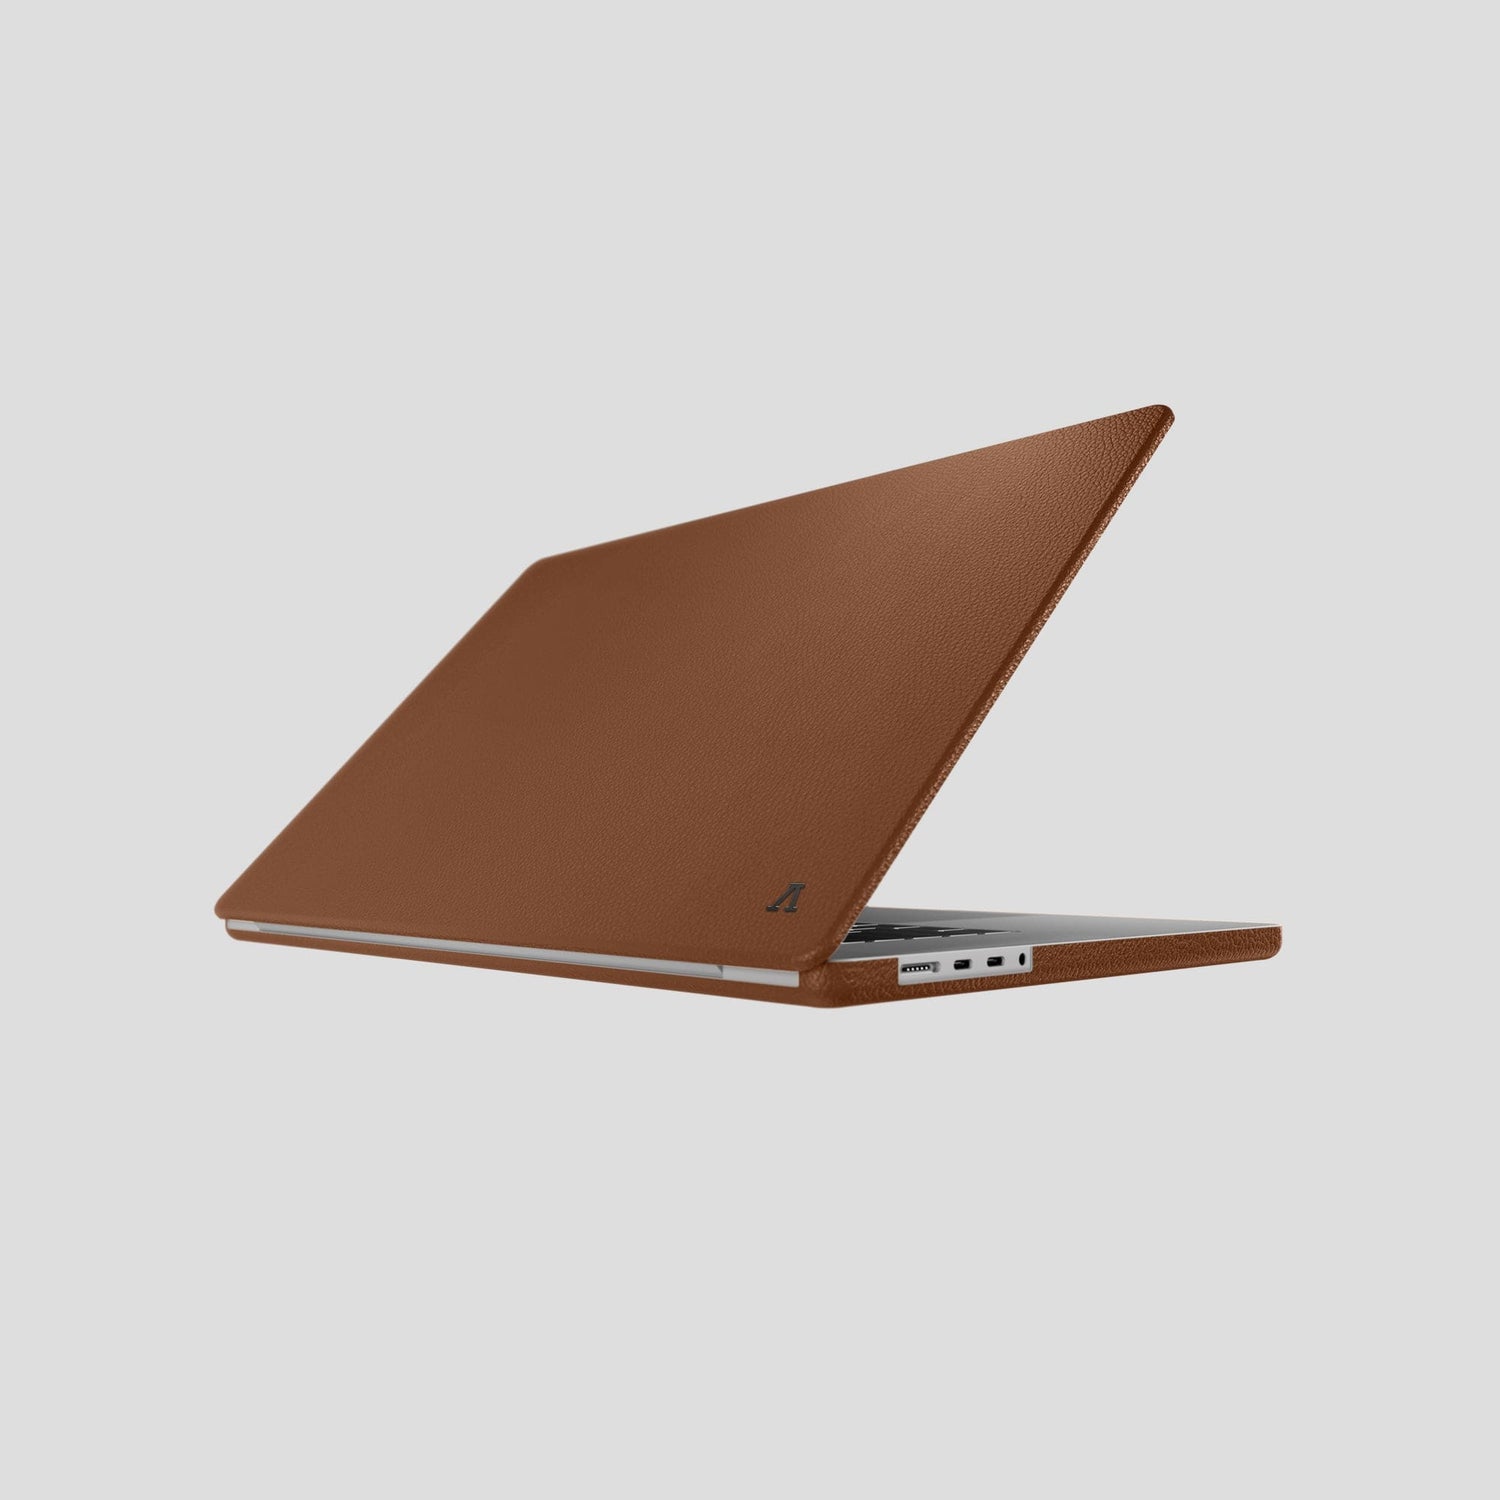 iPad Pro 12.9” Leather Case - Protection and Style - Floater Saddle Tan